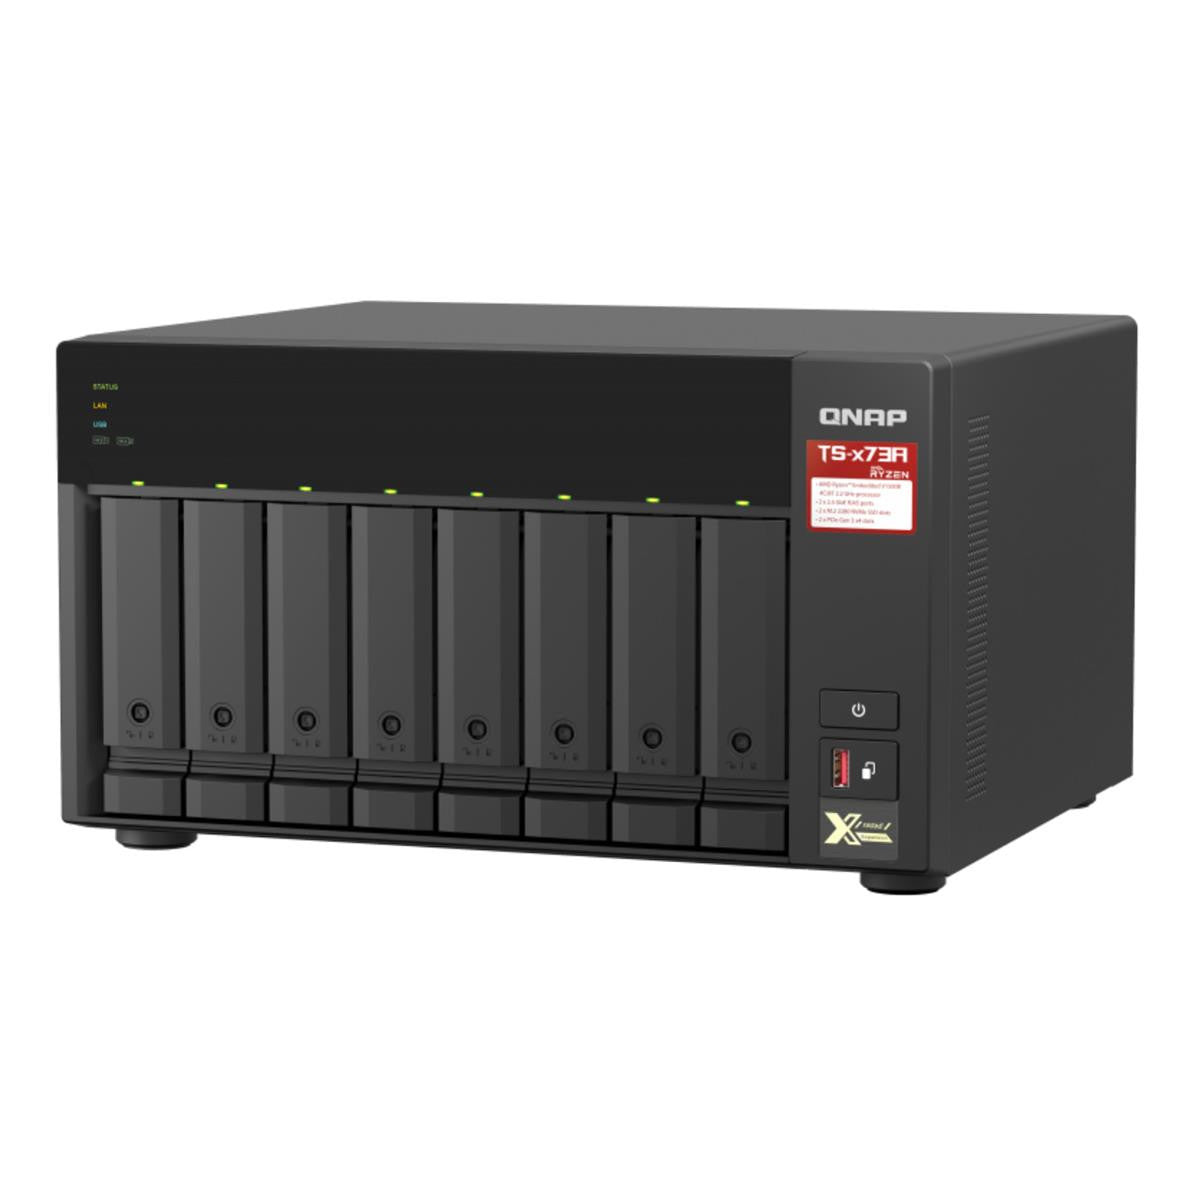 QNAP TS-873A 8-BAY NAS with 32GB DDR4 RAM and 96TB (8x12TB) Western Digital RED PLUS Drives Fully Assembled and Tested